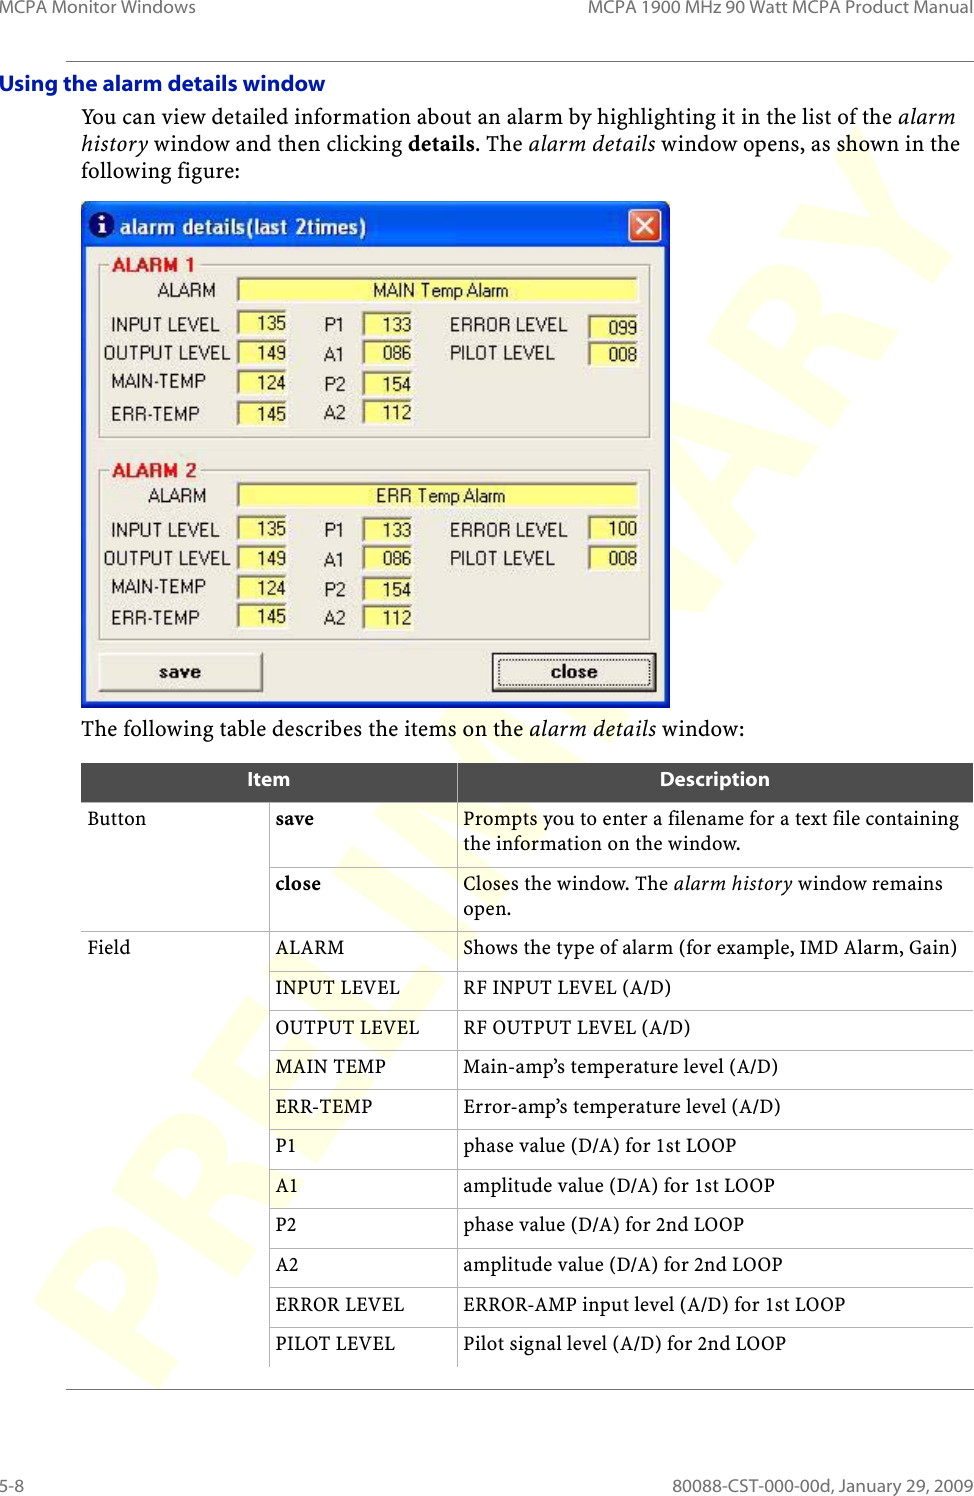 MCPA Monitor Windows MCPA 1900 MHz 90 Watt MCPA Product Manual5-8 80088-CST-000-00d, January 29, 2009Using the alarm details windowYou can view detailed information about an alarm by highlighting it in the list of the alarm history window and then clicking details. The alarm details window opens, as shown in the following figure:The following table describes the items on the alarm details window:Item DescriptionButton save Prompts you to enter a filename for a text file containing the information on the window.close Closes the window. The alarm history window remains open.Field ALARM Shows the type of alarm (for example, IMD Alarm, Gain)INPUT LEVEL RF INPUT LEVEL (A/D)OUTPUT LEVEL RF OUTPUT LEVEL (A/D)MAIN TEMP Main-amp’s temperature level (A/D)ERR-TEMP Error-amp’s temperature level (A/D)P1 phase value (D/A) for 1st LOOPA1 amplitude value (D/A) for 1st LOOPP2 phase value (D/A) for 2nd LOOPA2 amplitude value (D/A) for 2nd LOOPERROR LEVEL ERROR-AMP input level (A/D) for 1st LOOPPILOT LEVEL Pilot signal level (A/D) for 2nd LOOP